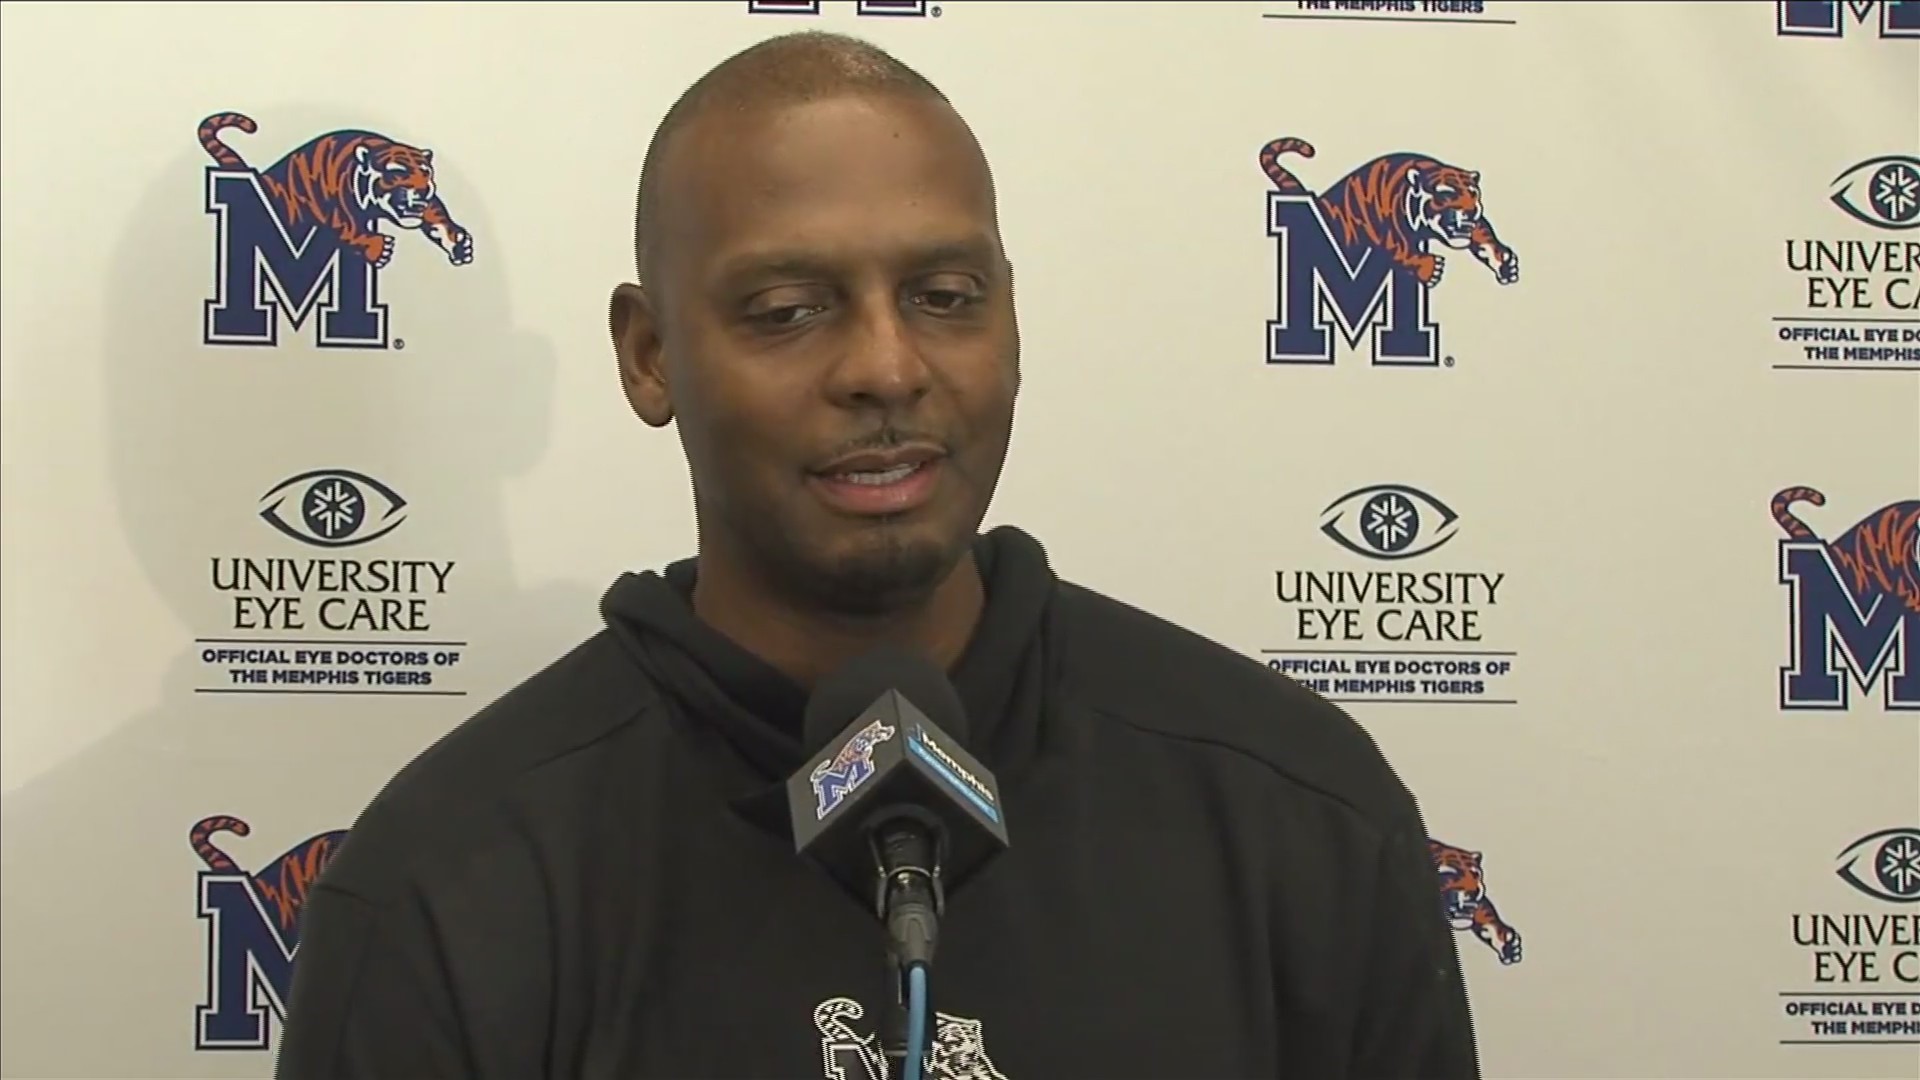 Memphis Tigers Coach Penny Hardaway to speak publicly for first time since Wiseman withdrew lawsuit against NCAA